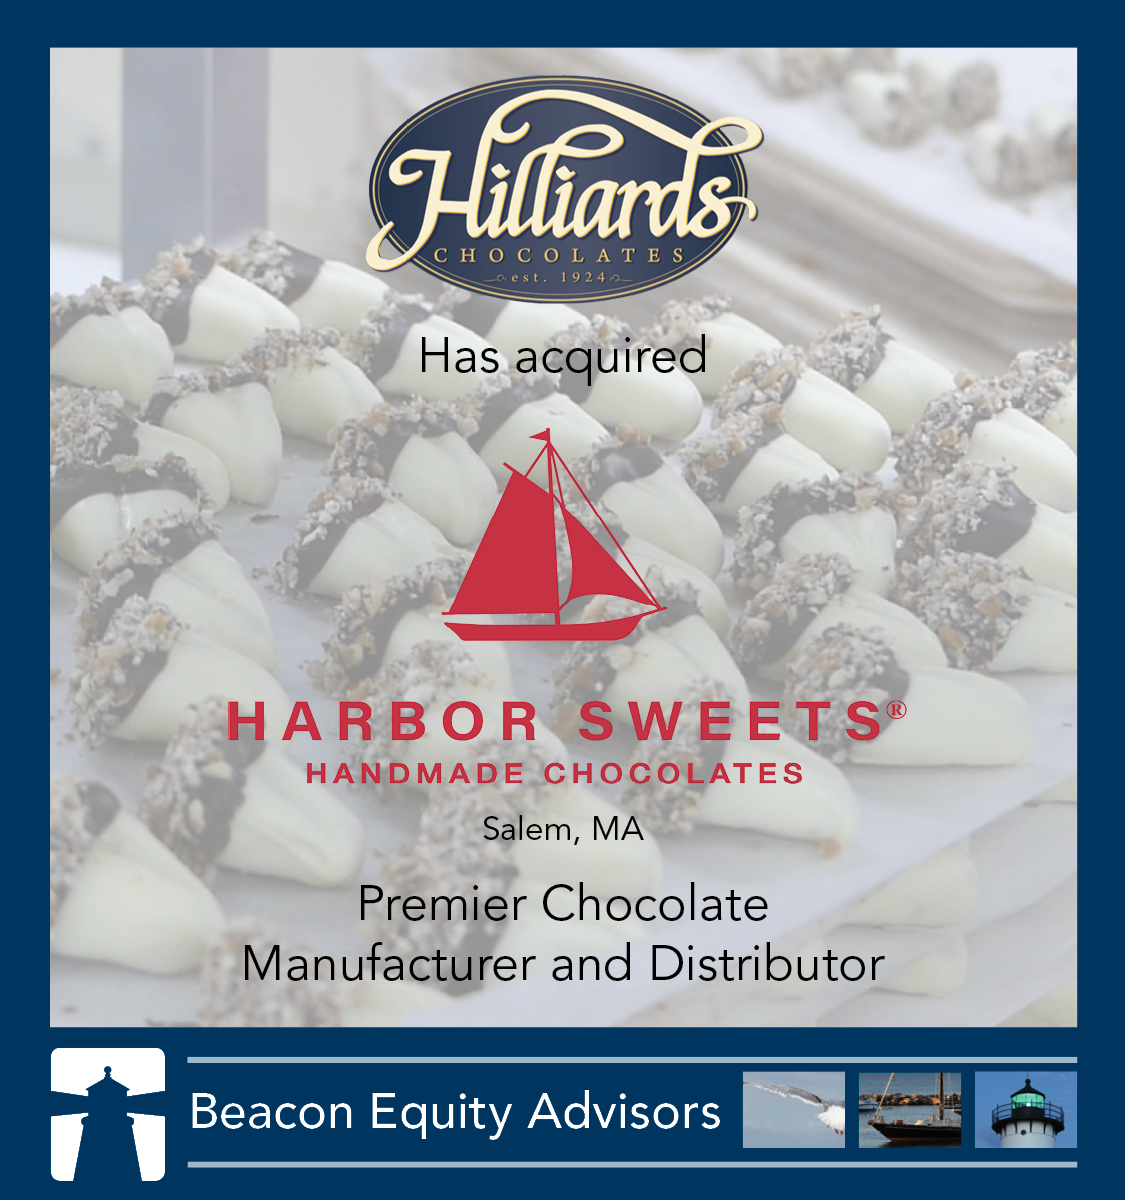 Harbor Sweets purchased by Hilliards Chocolates